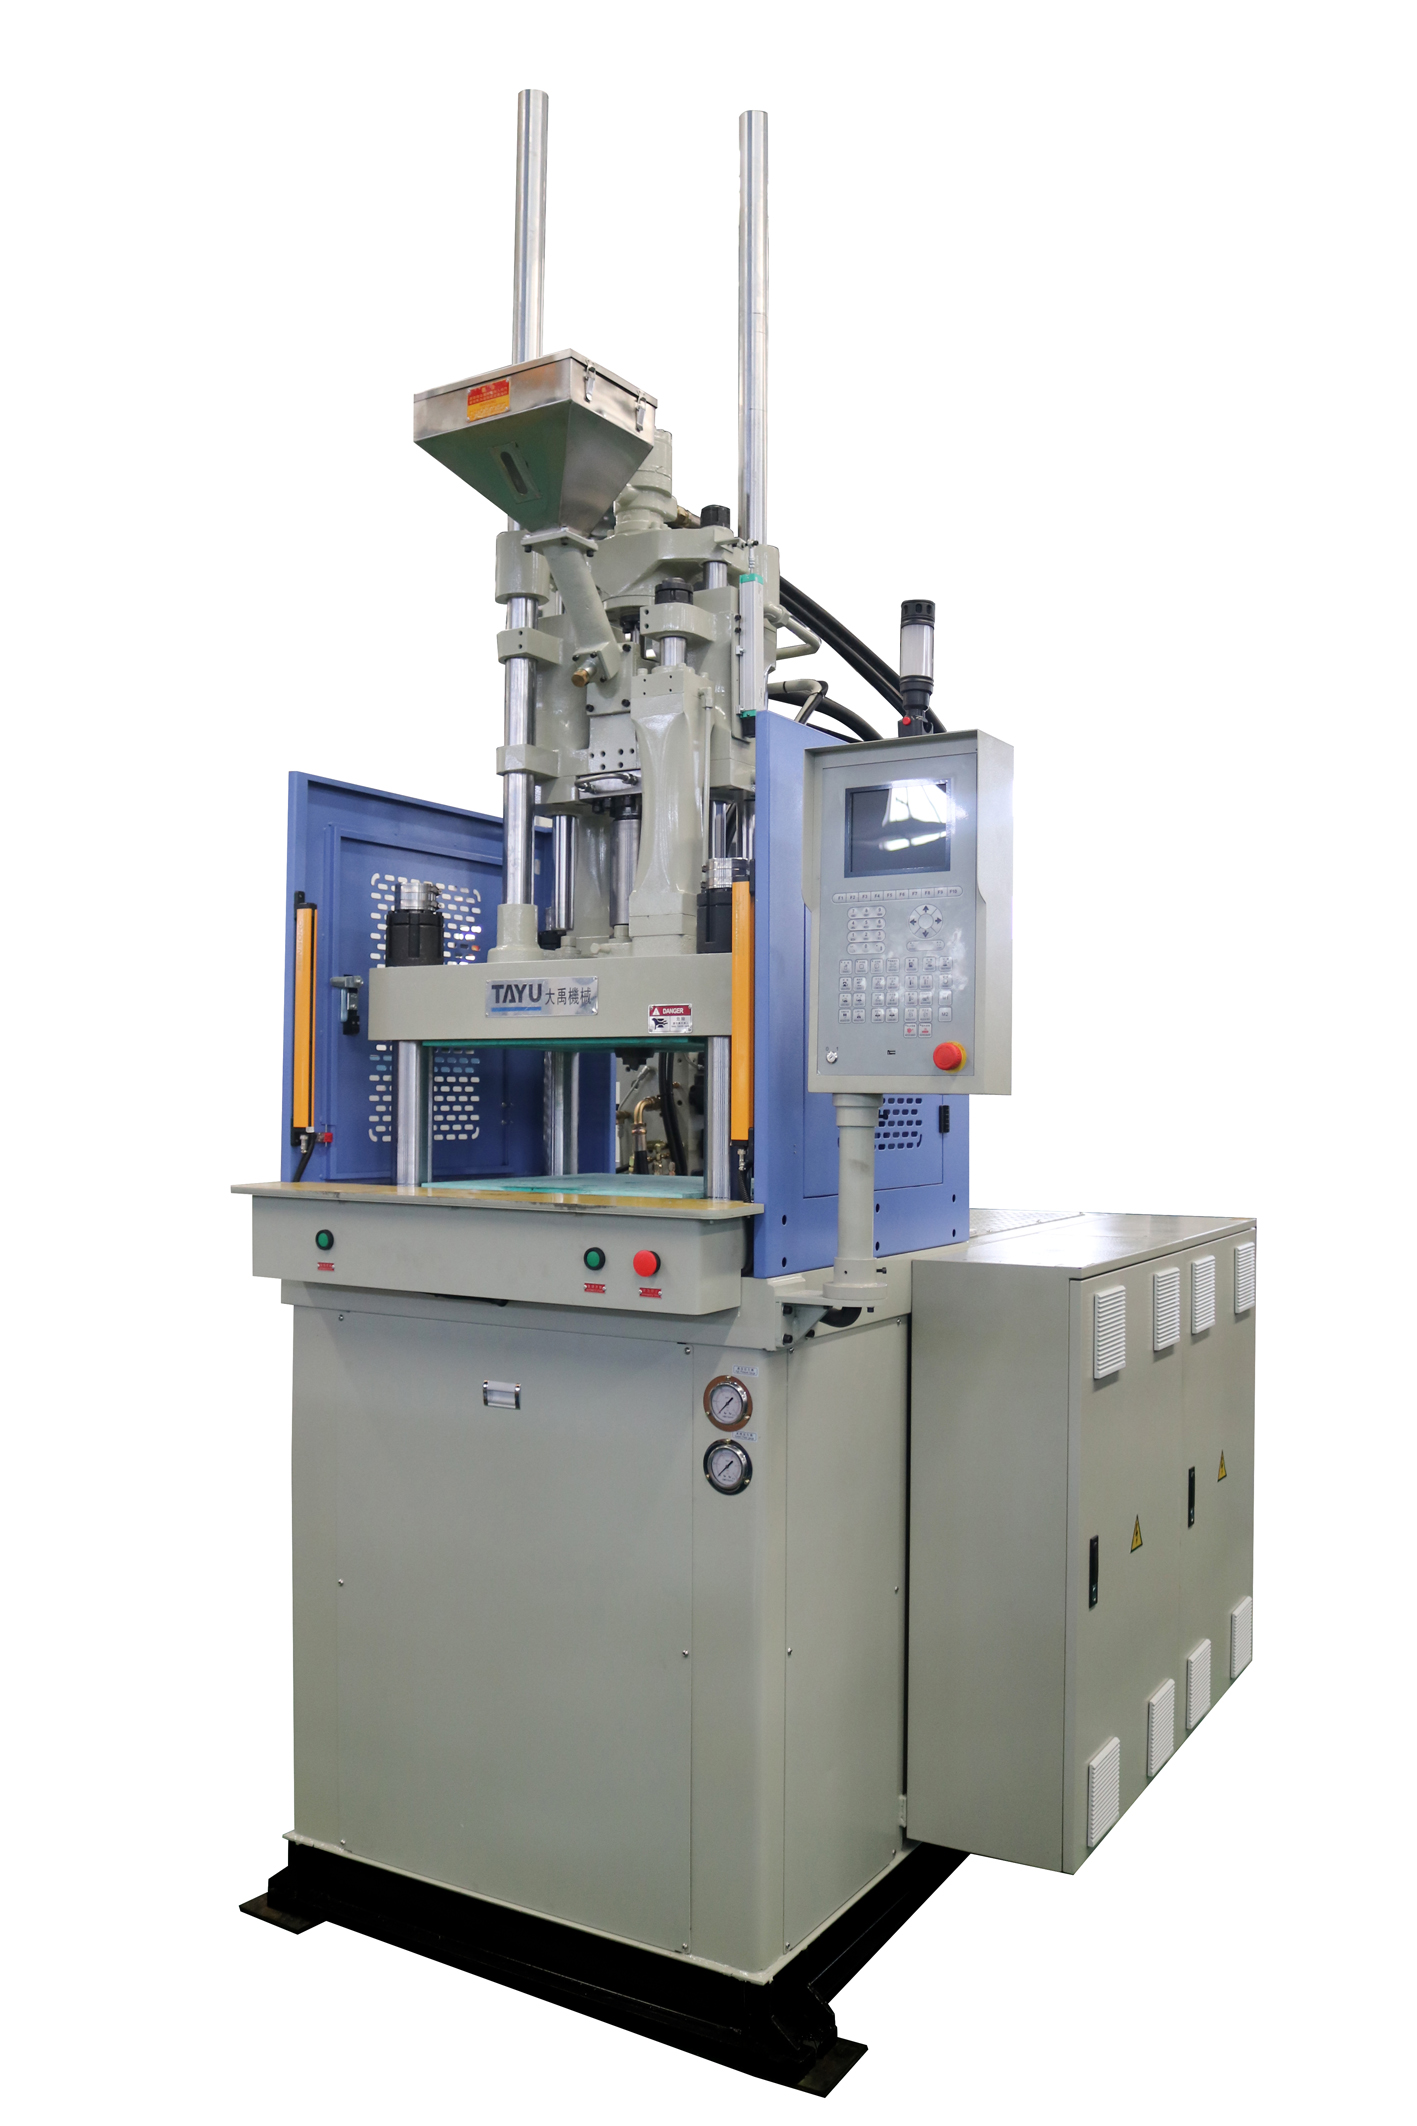 TY-1200.B vertical injection molding machine